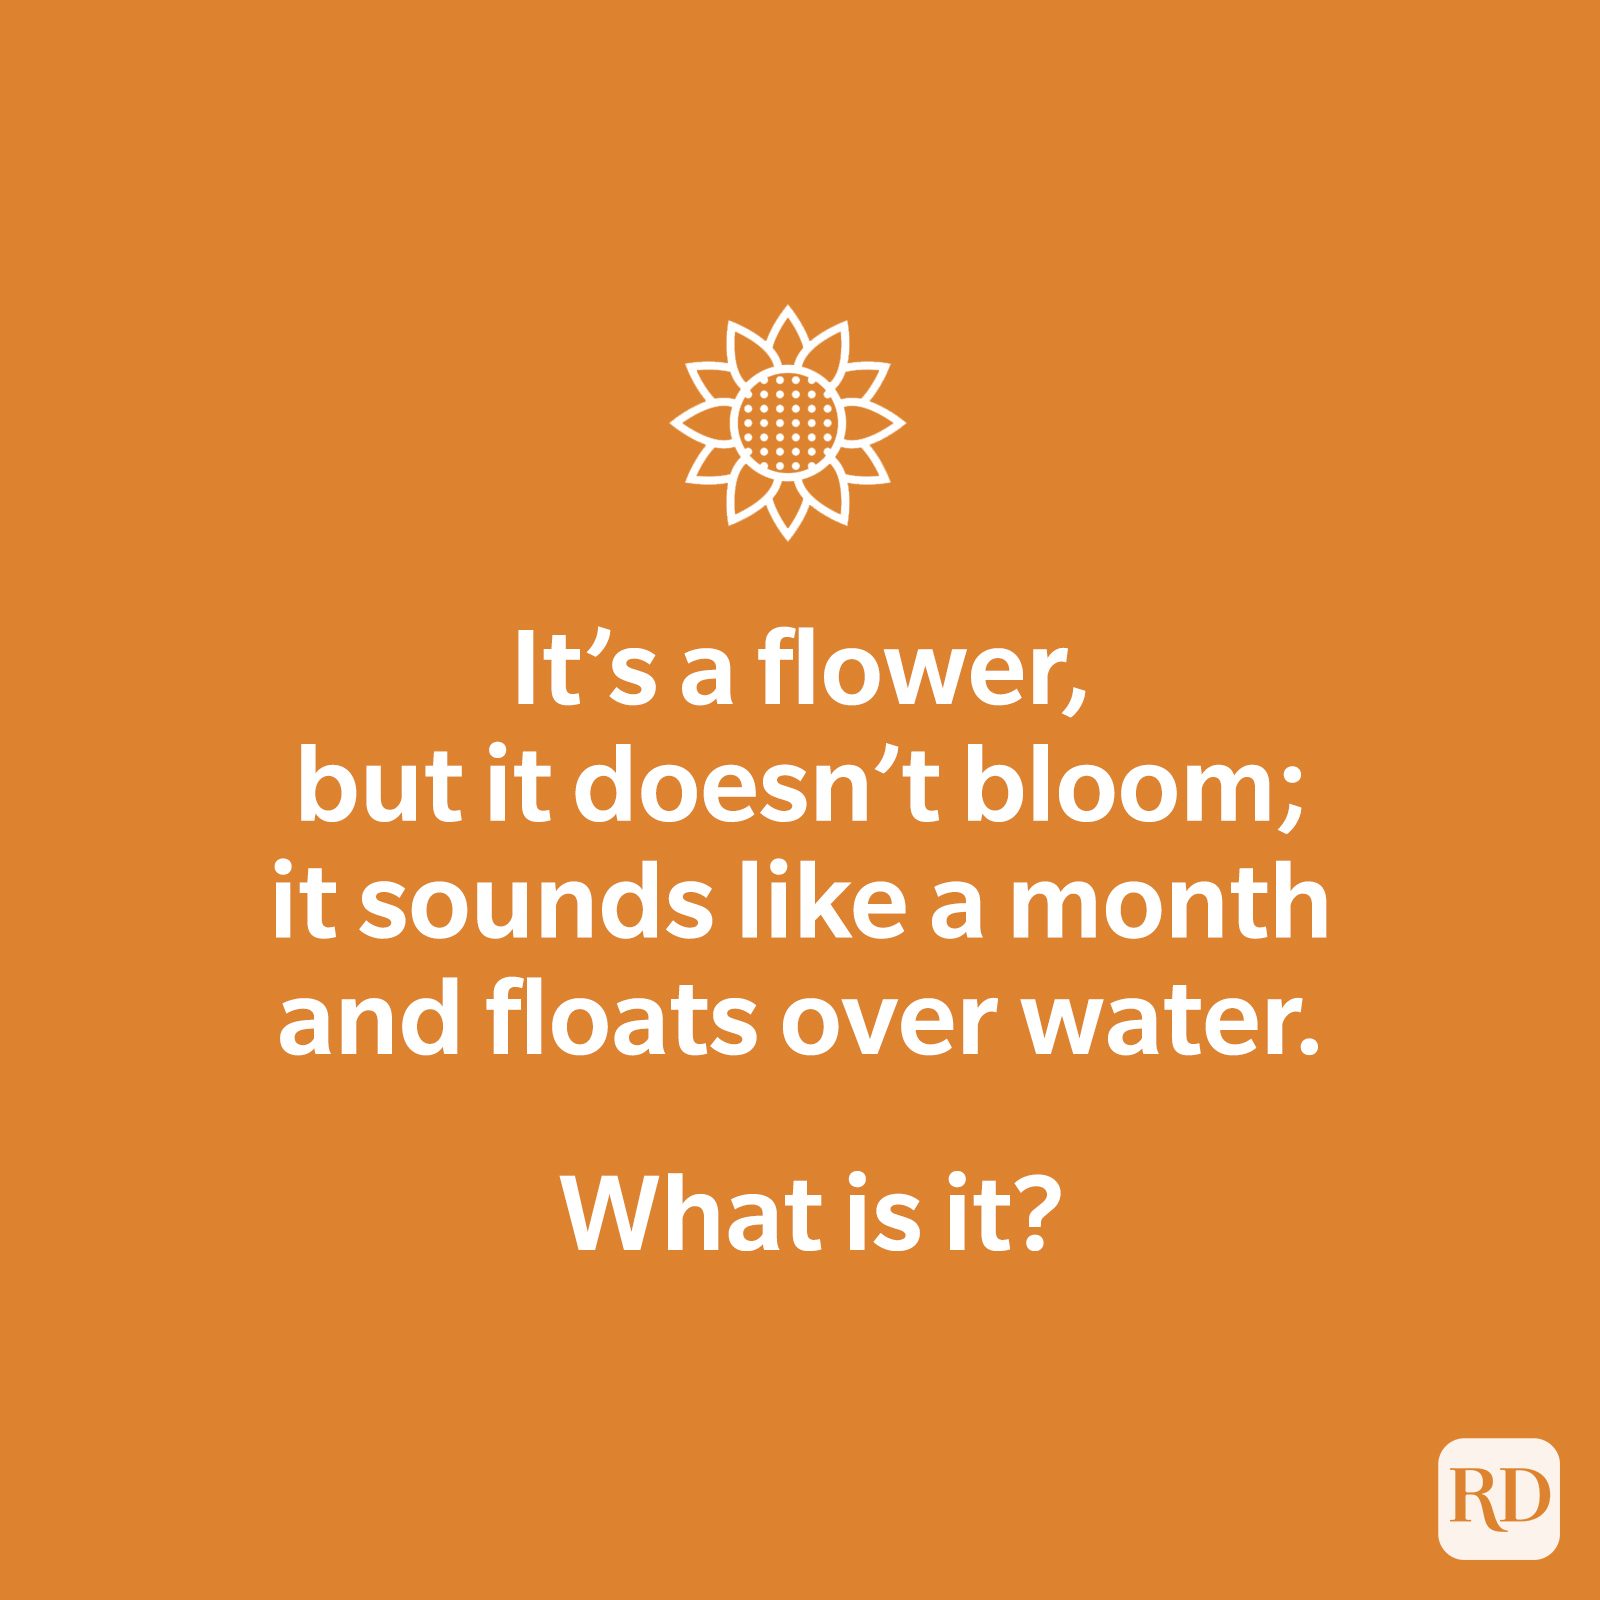 It's a flower, but it doesn't bloom; it sounds like a month and float over water. What is it?